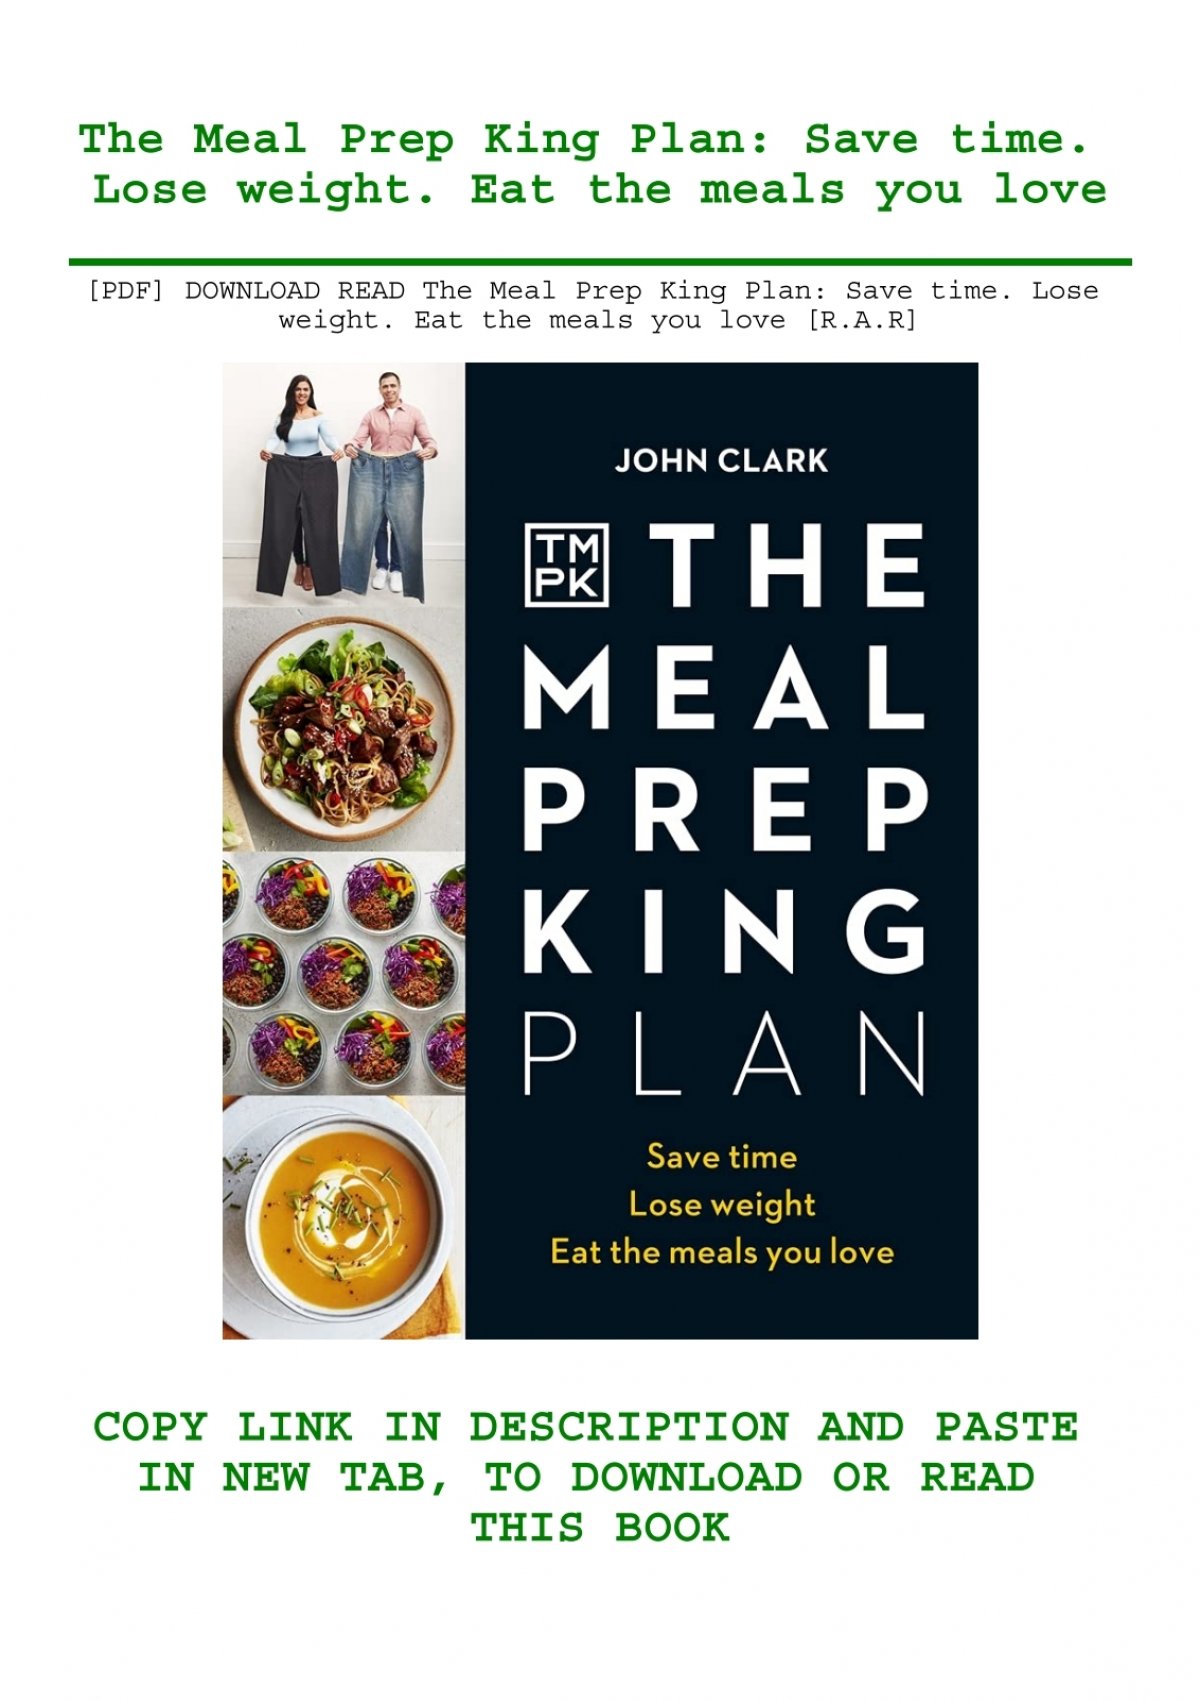 pdf-download-read-the-meal-prep-king-plan-save-time-lose-weight-eat